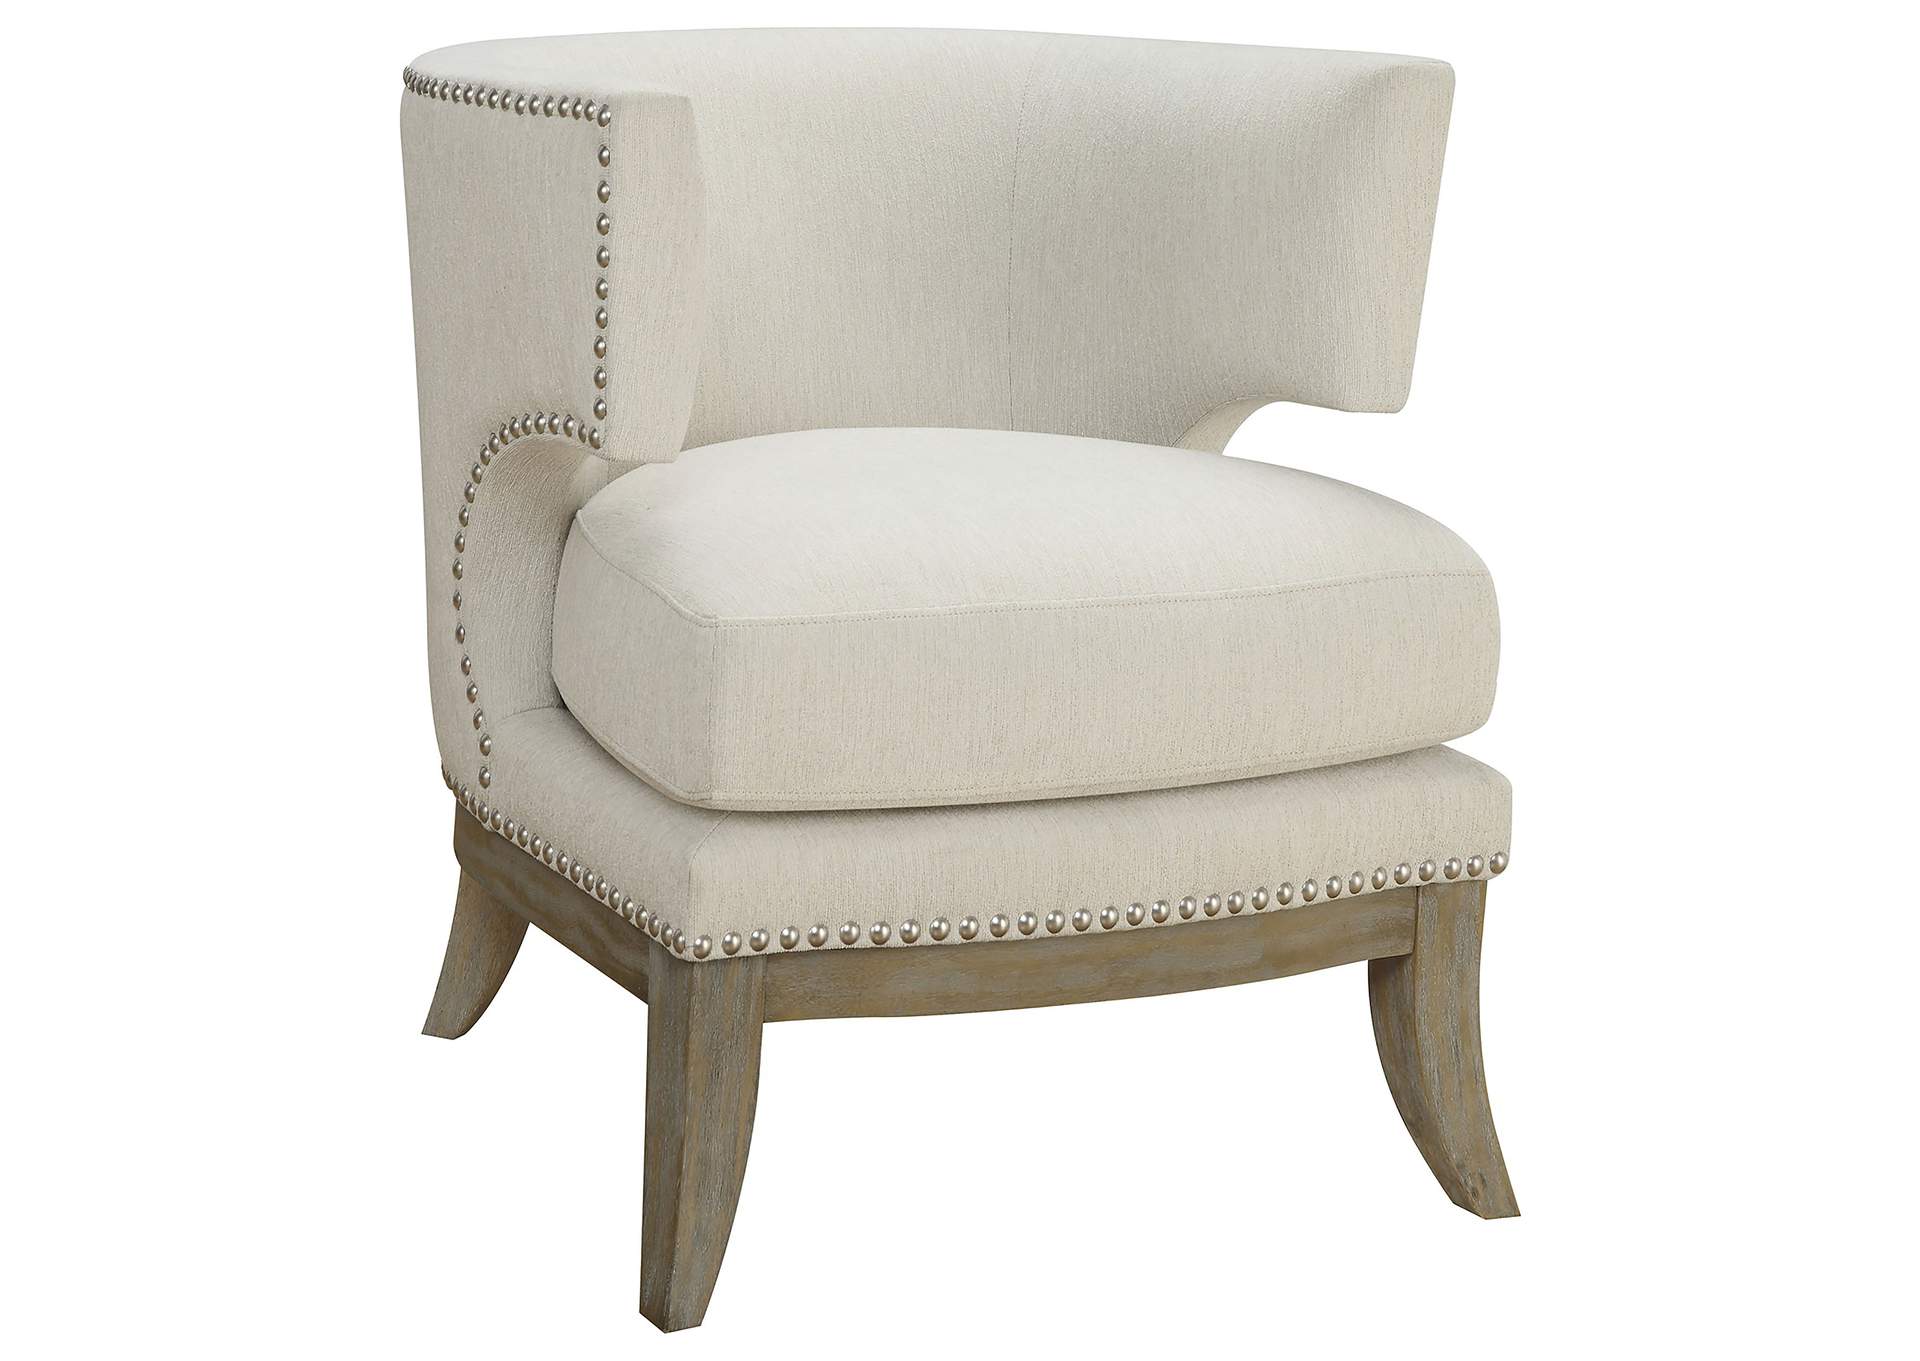 Dominic Barrel Back Accent Chair White and Weathered Grey,Coaster Furniture